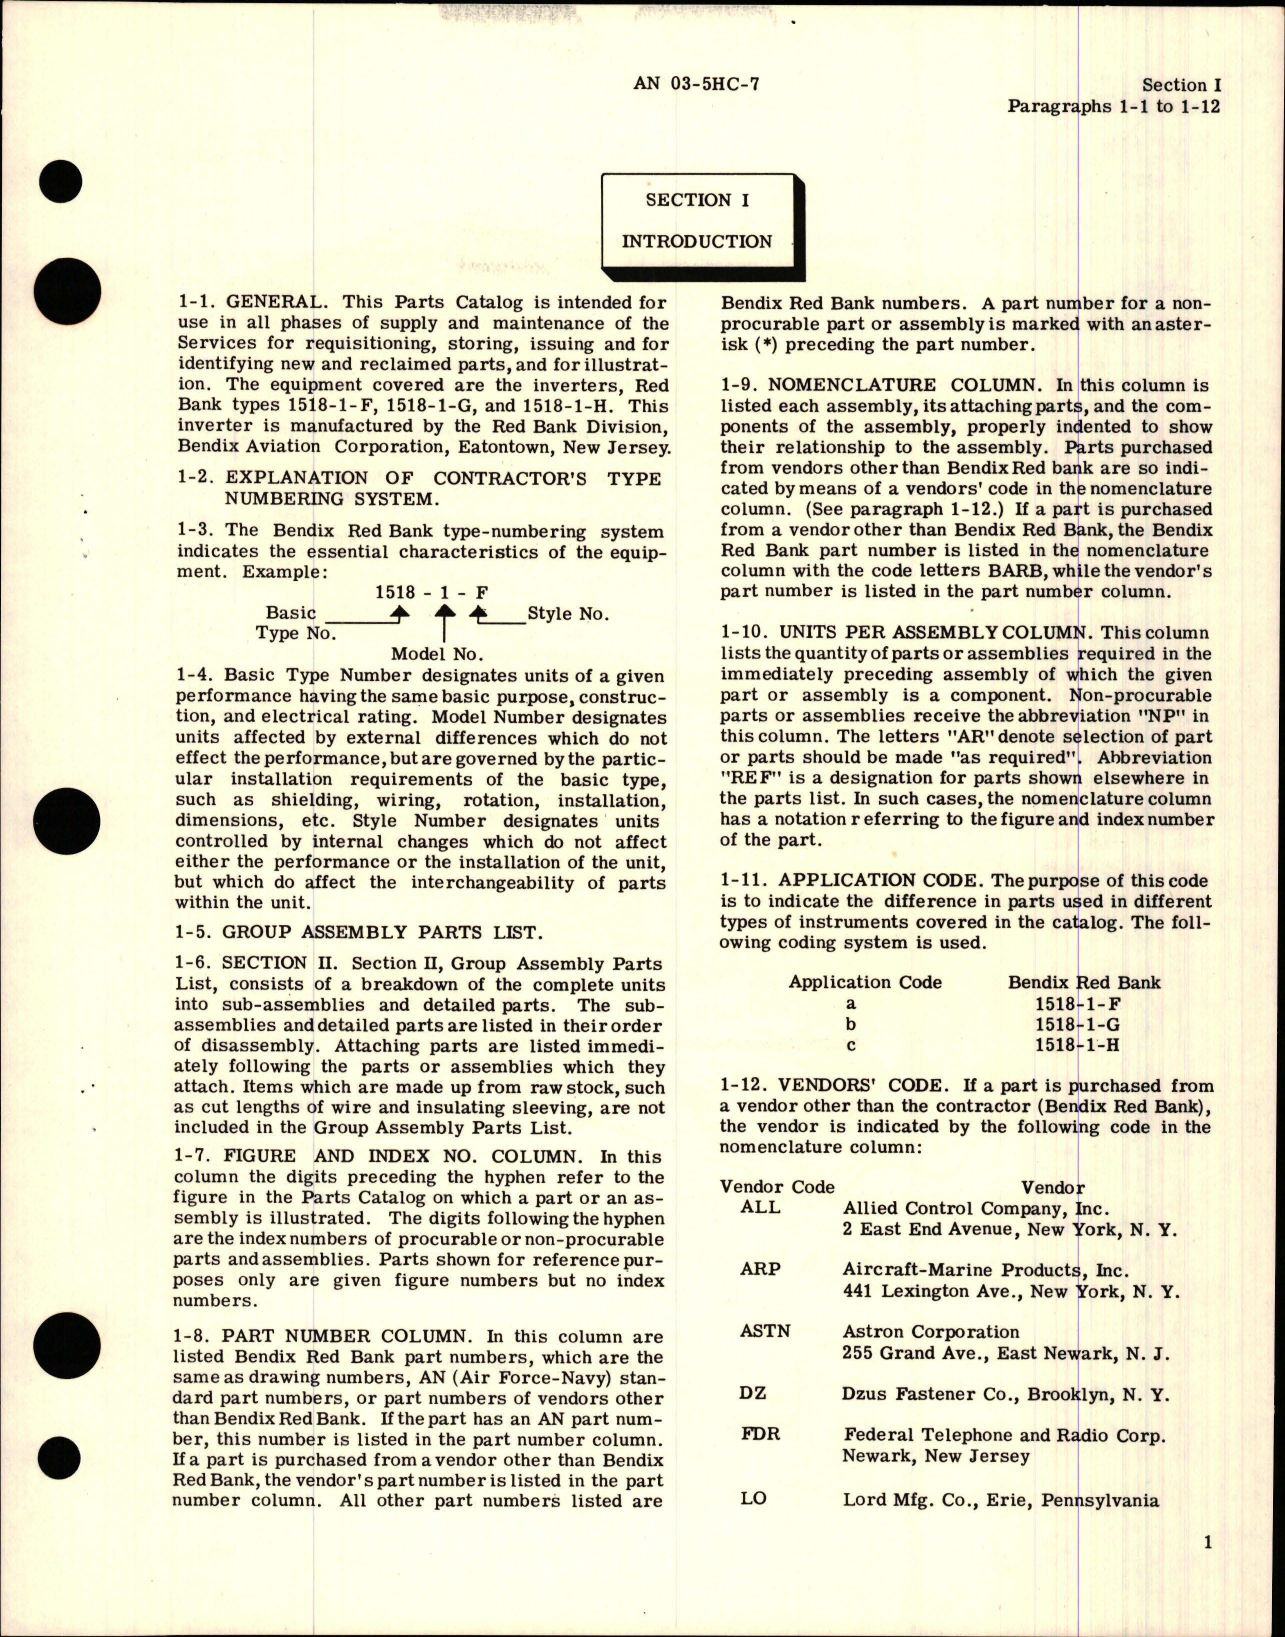 Sample page 5 from AirCorps Library document: Parts Catalog for Inverter 